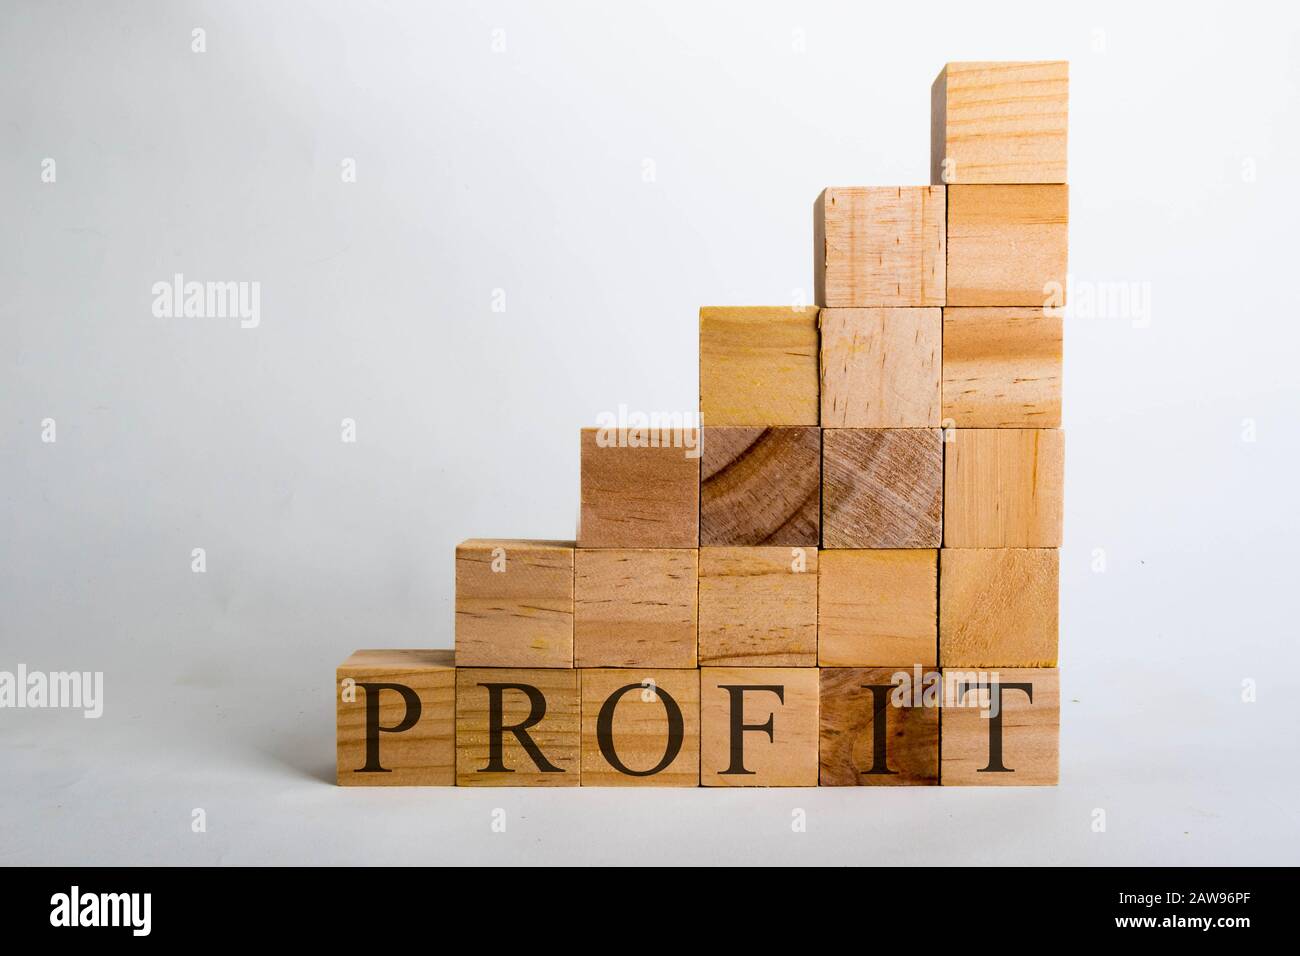 Wooden cubes with lettering spelling Profit shaped like a graph. Business concept Stock Photo